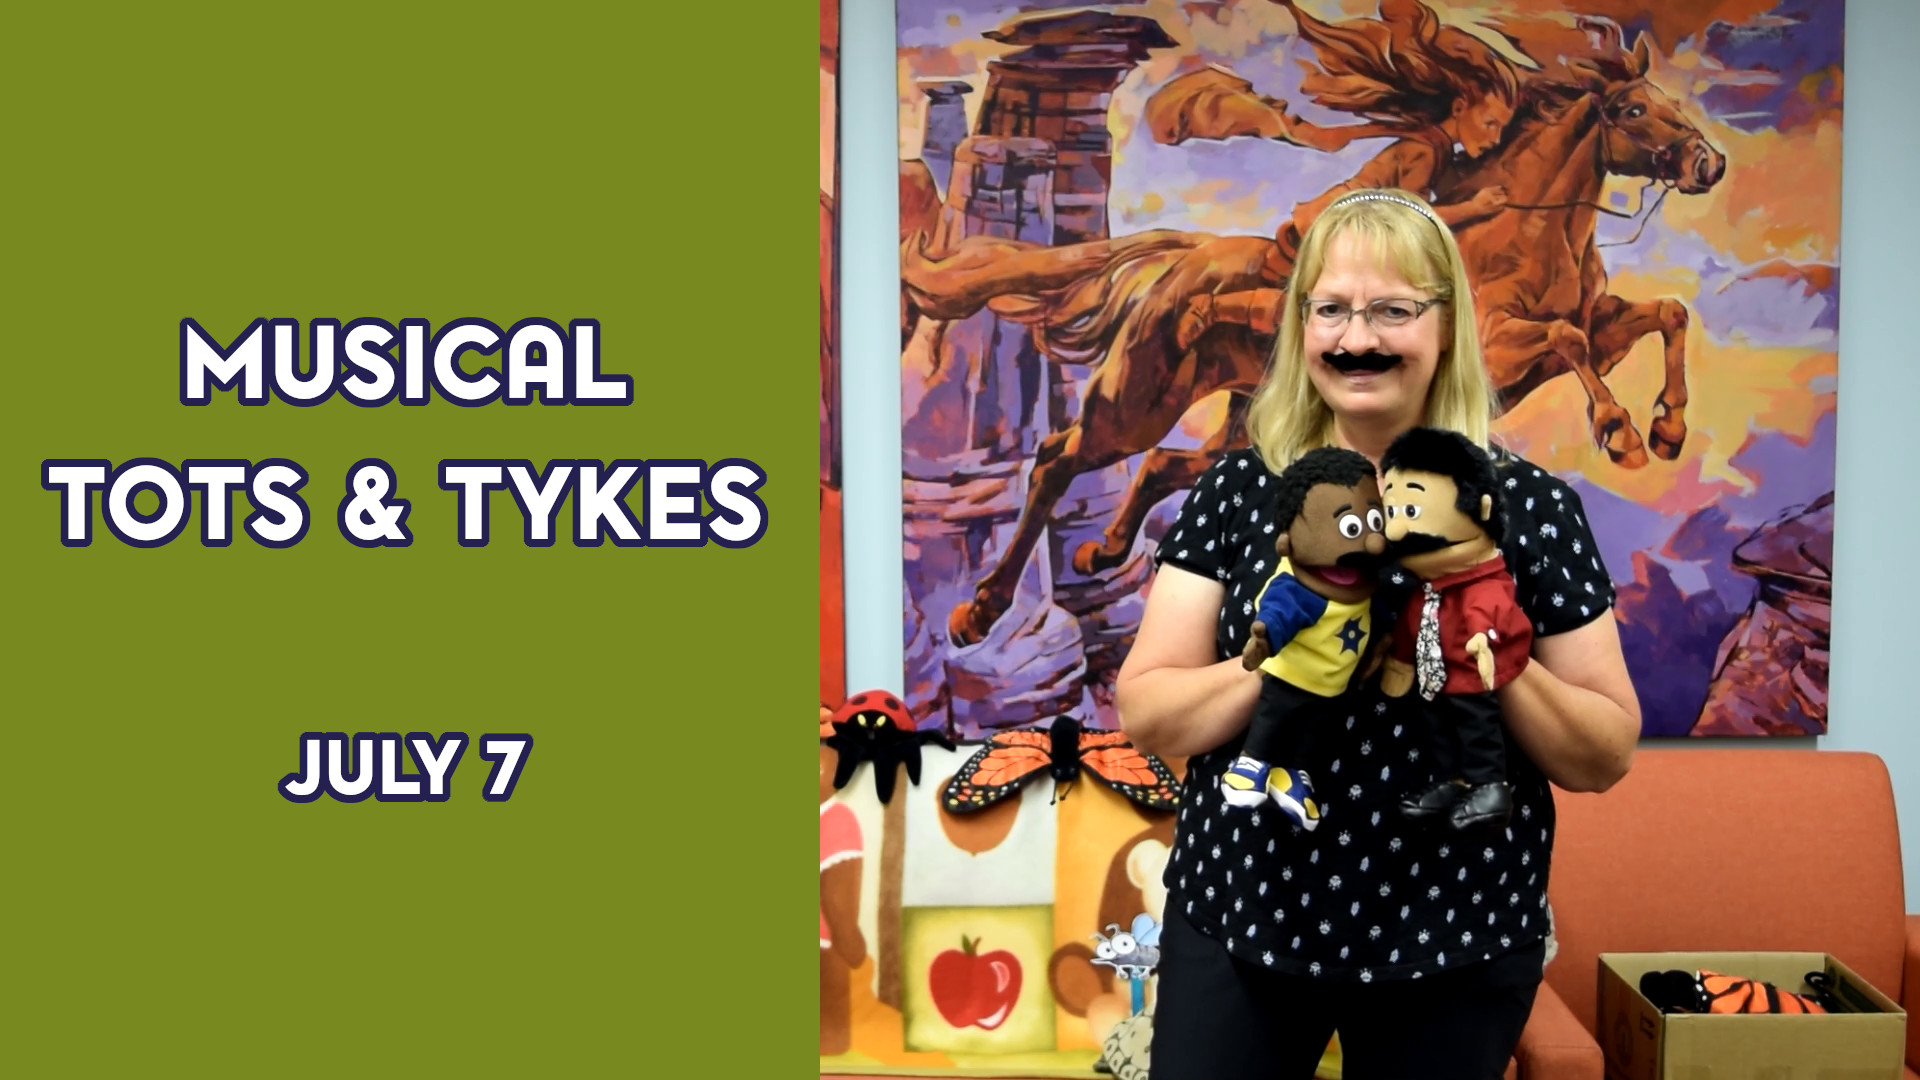 A woman wearing a fake moustache holds puppets next to the text "Musical Tots & Tykes July 7"